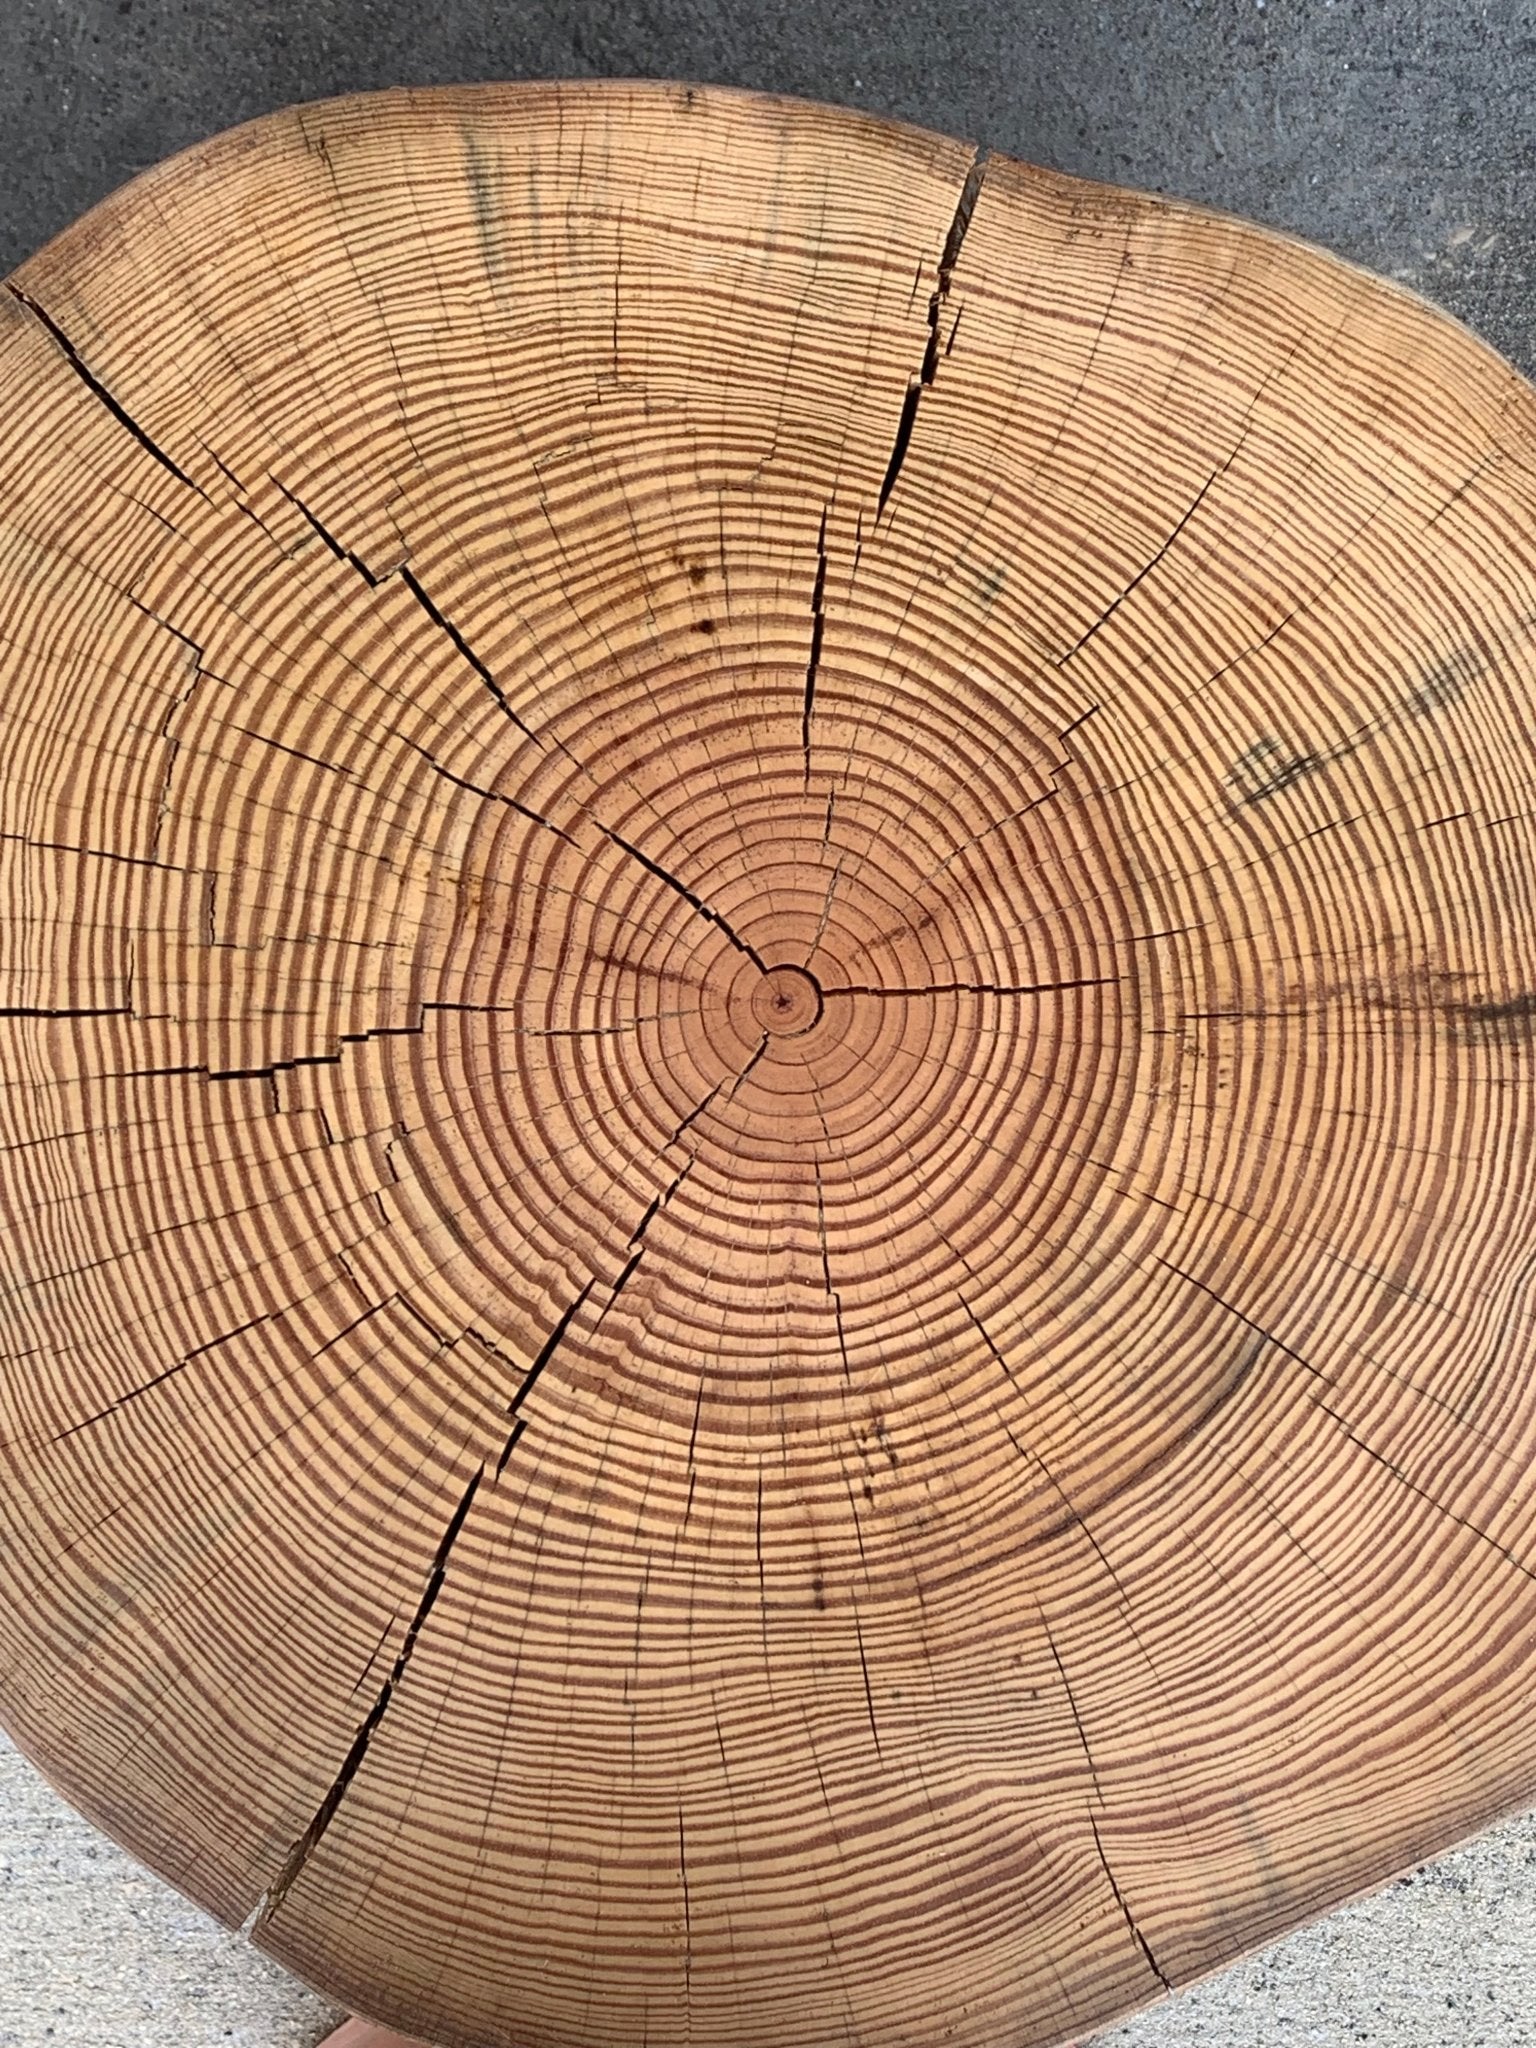 HOW TO COUNT THE RINGS OF A TREE – Alabama Sawyer